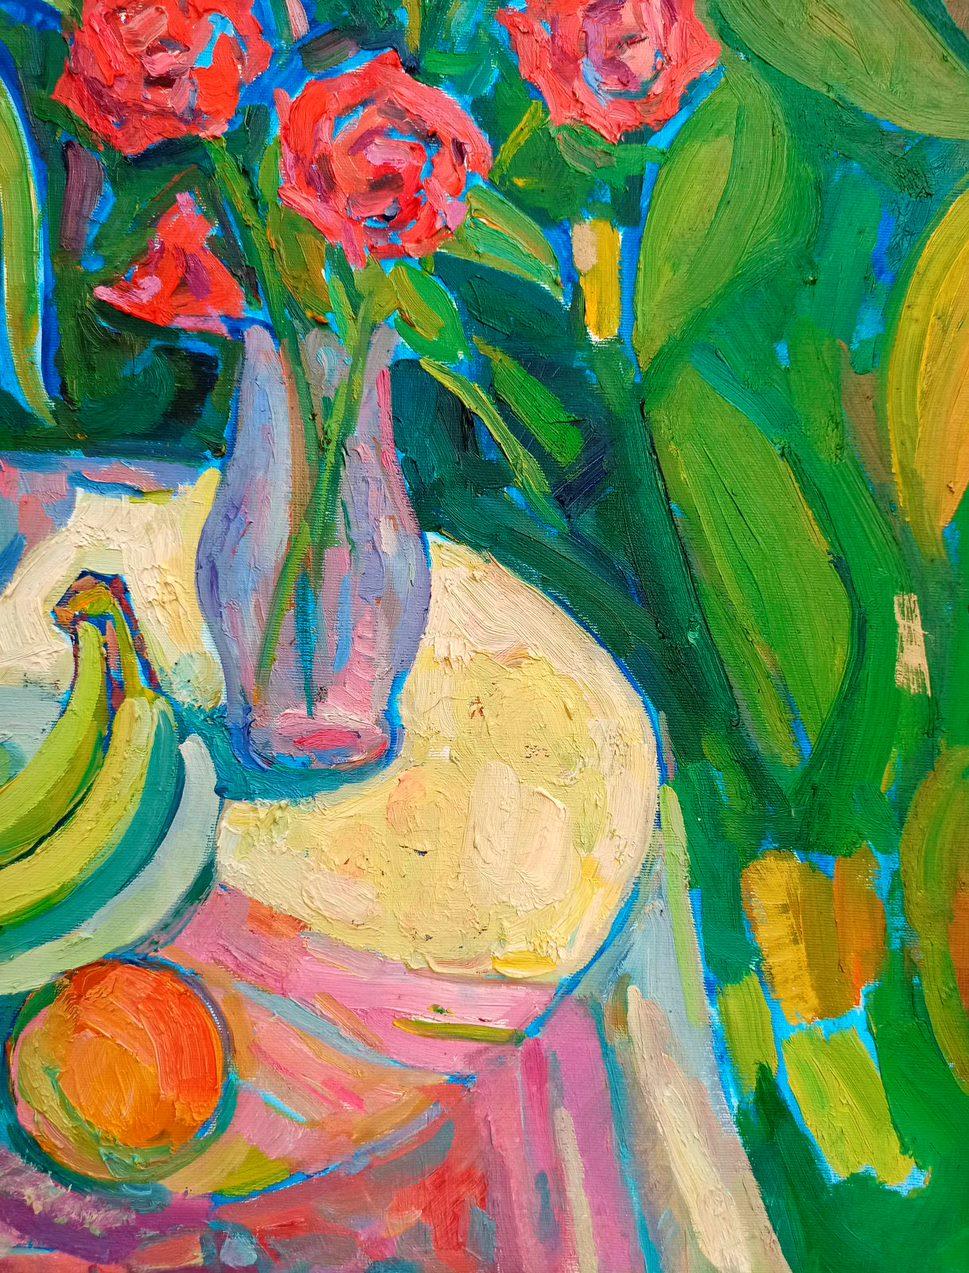 Artist: Peter Tovpev
Work: Original oil painting, handmade artwork, one of a kind 
Medium: Oil on Canvas 
Year: 2017
Style: Impressionism
Title: Still Life with Lilies
Size: 27.5